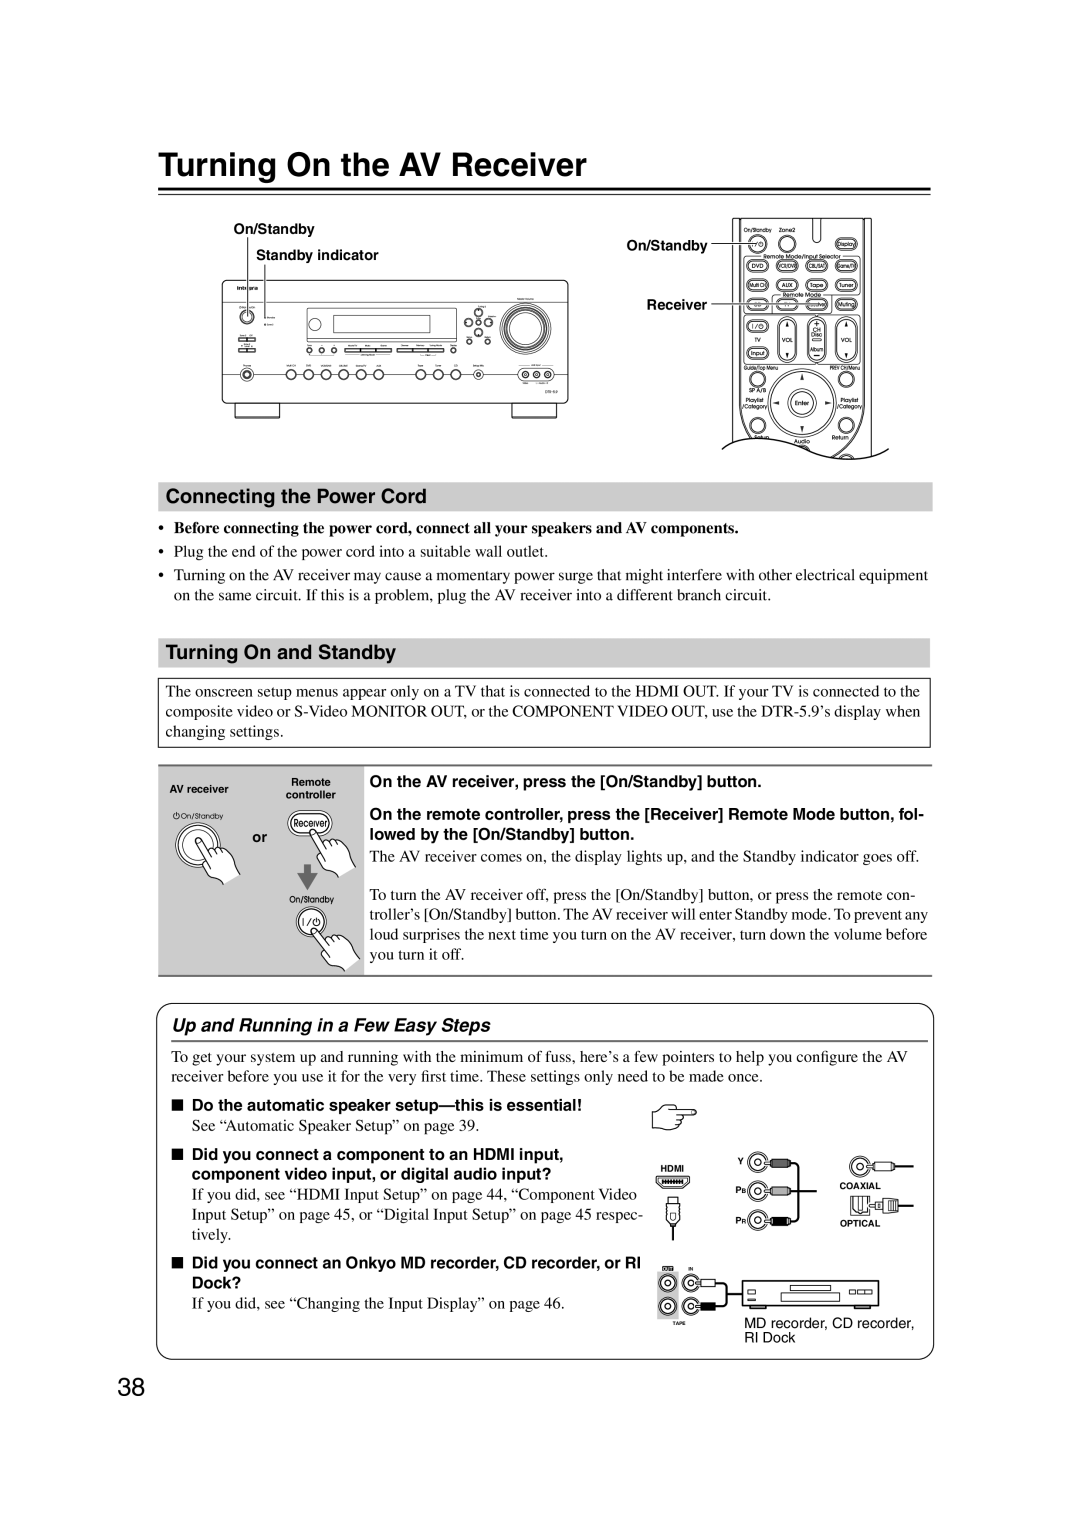 Integra DTR-5.9 instruction manual Turning On the AV Receiver, Connecting the Power Cord, Turning On and Standby 